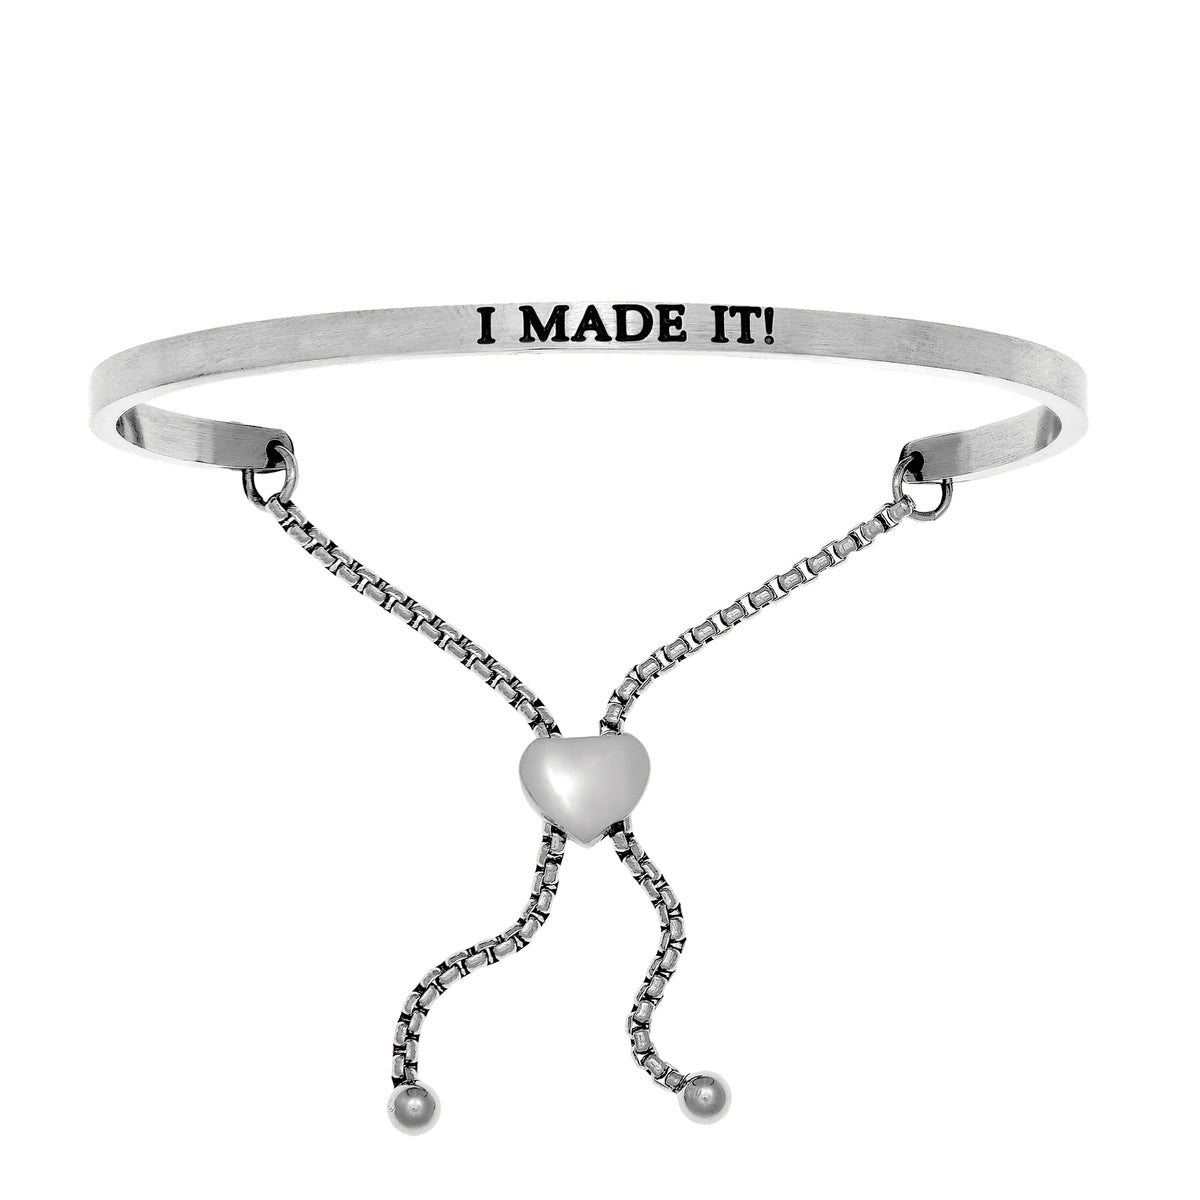 Intuitions Stainless Steel I MADE IT! Diamond Accent Adjustable Bracelet fine designer jewelry for men and women